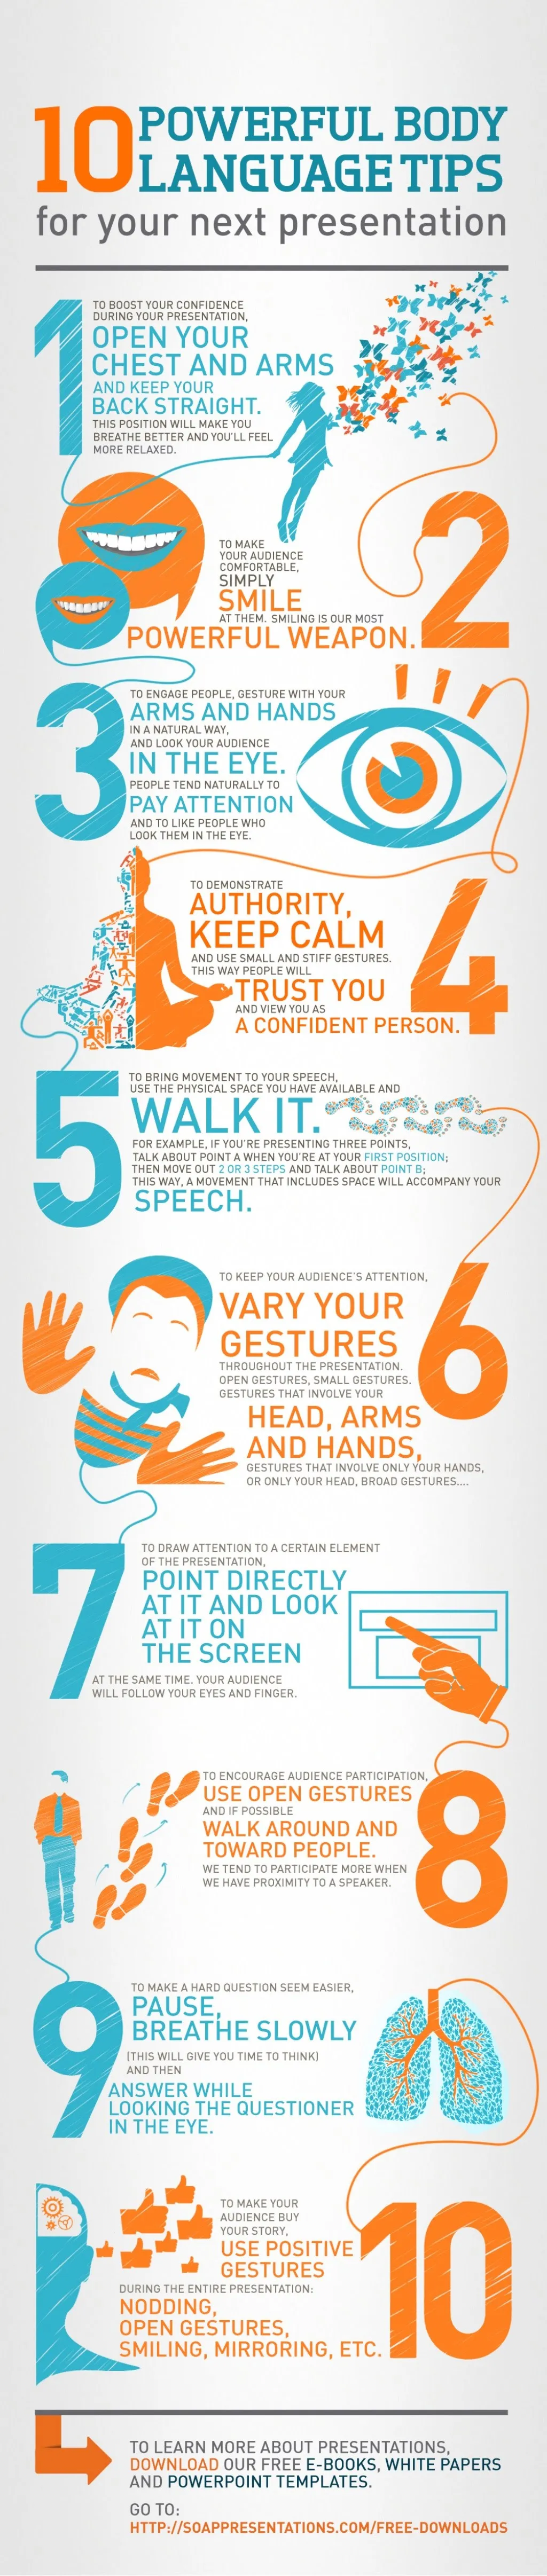 10 Powerful Body Language Tips for your next Presentation - #infographic